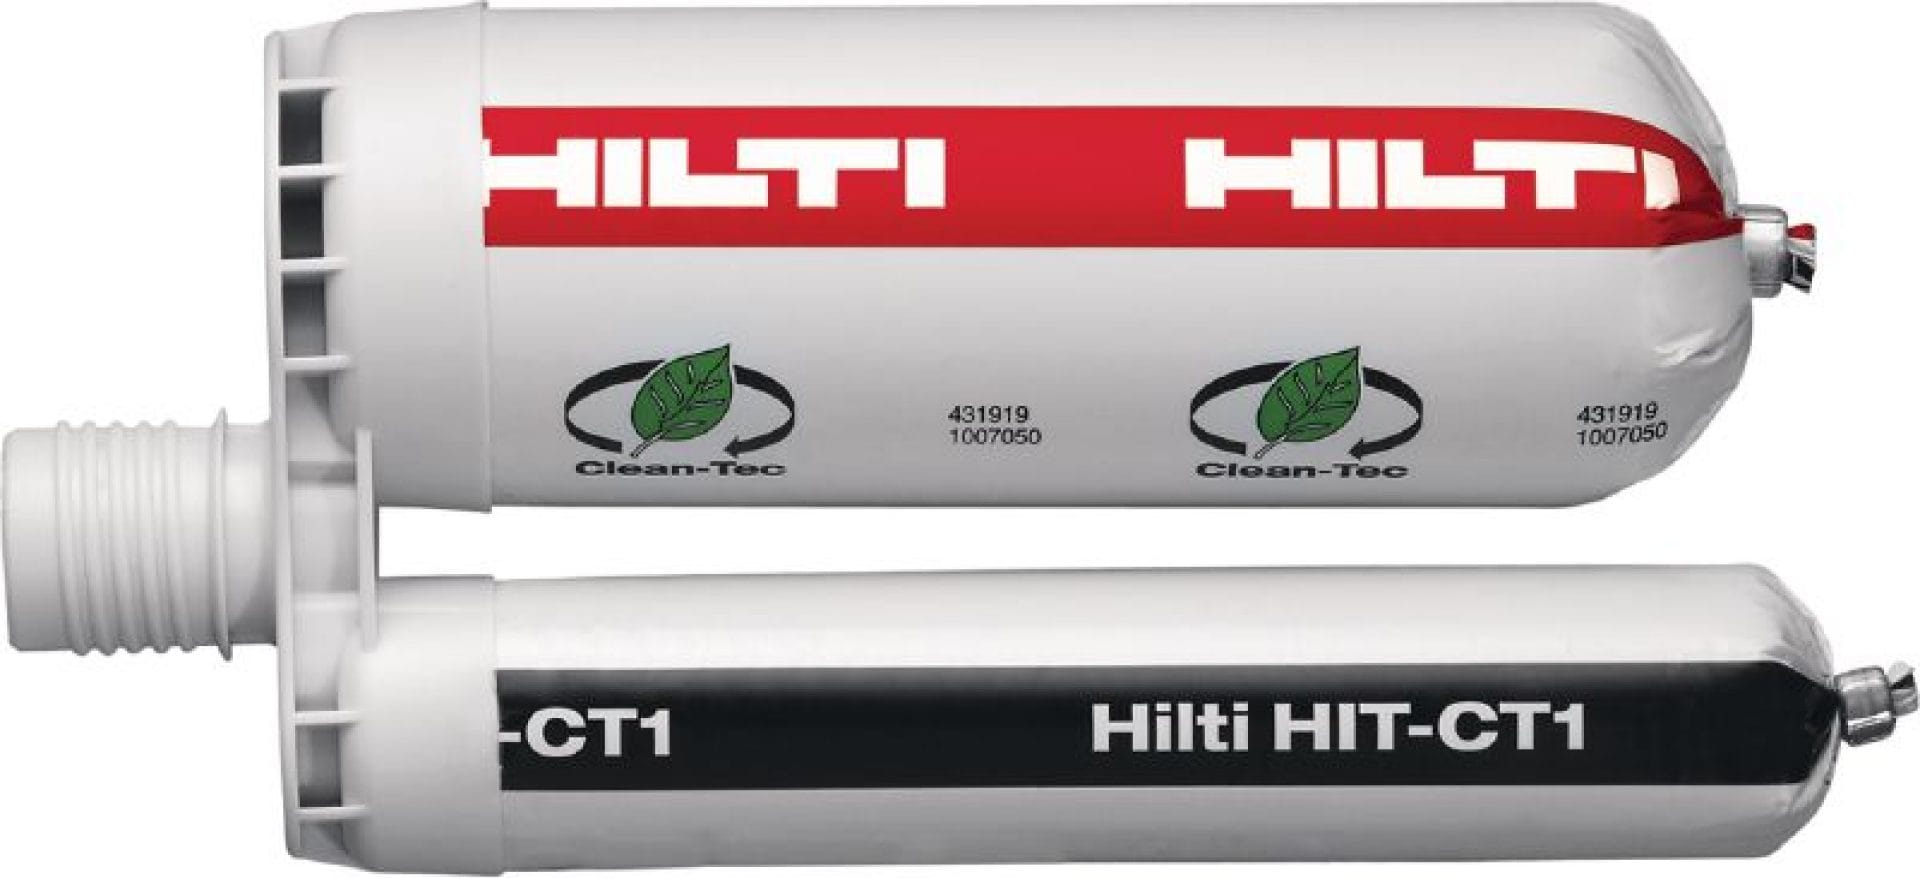 Hilti injectable mortar HIT-CT 1